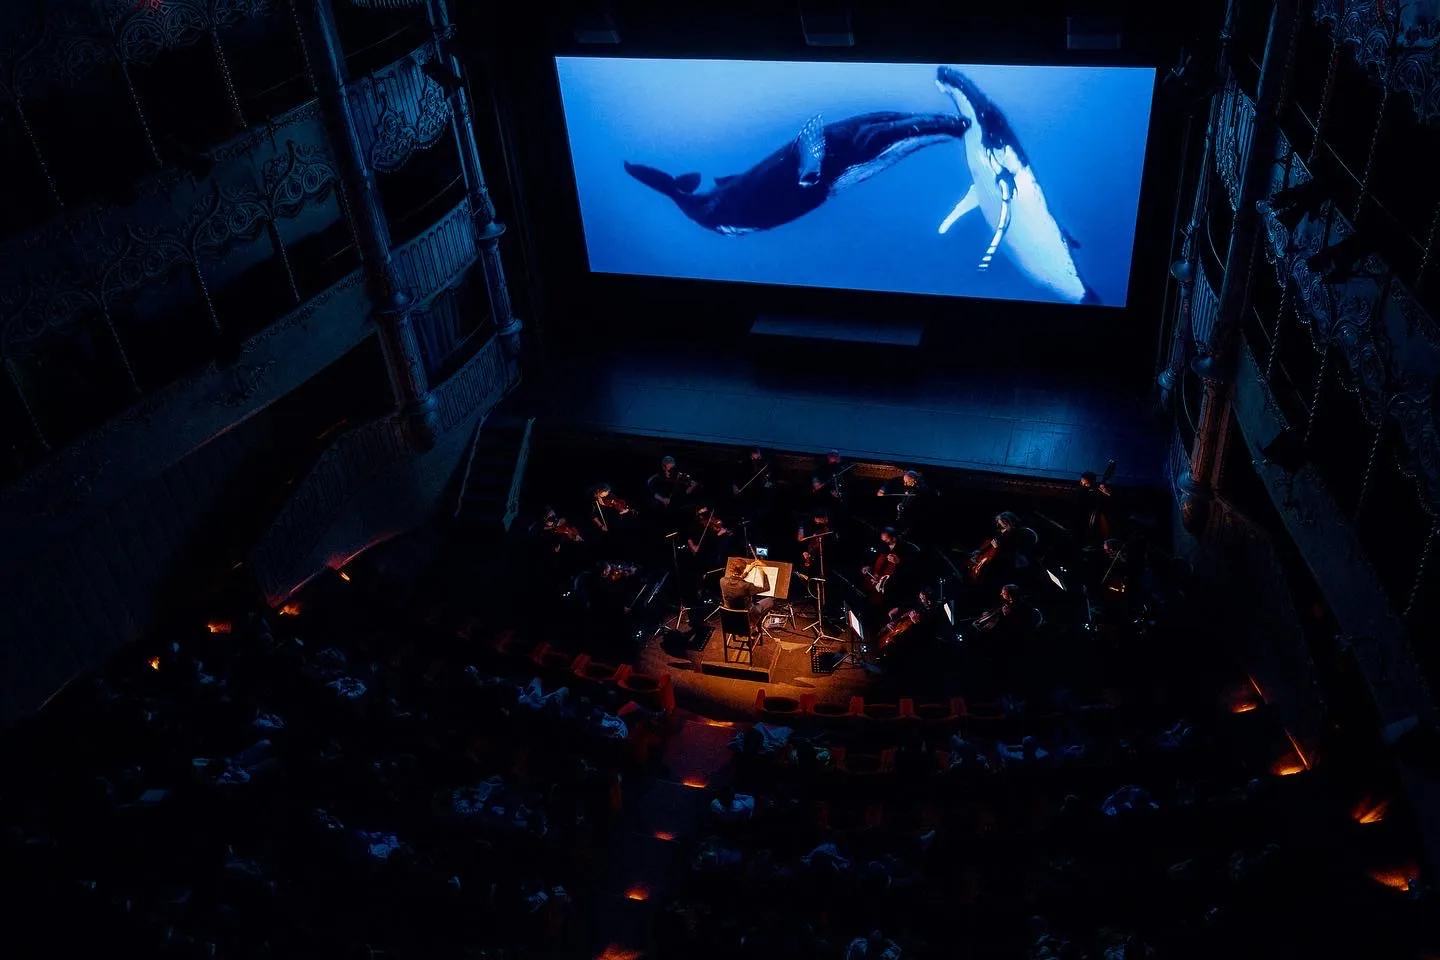 A live orchestra in a theatre with a projection of two large whales in blue water behind